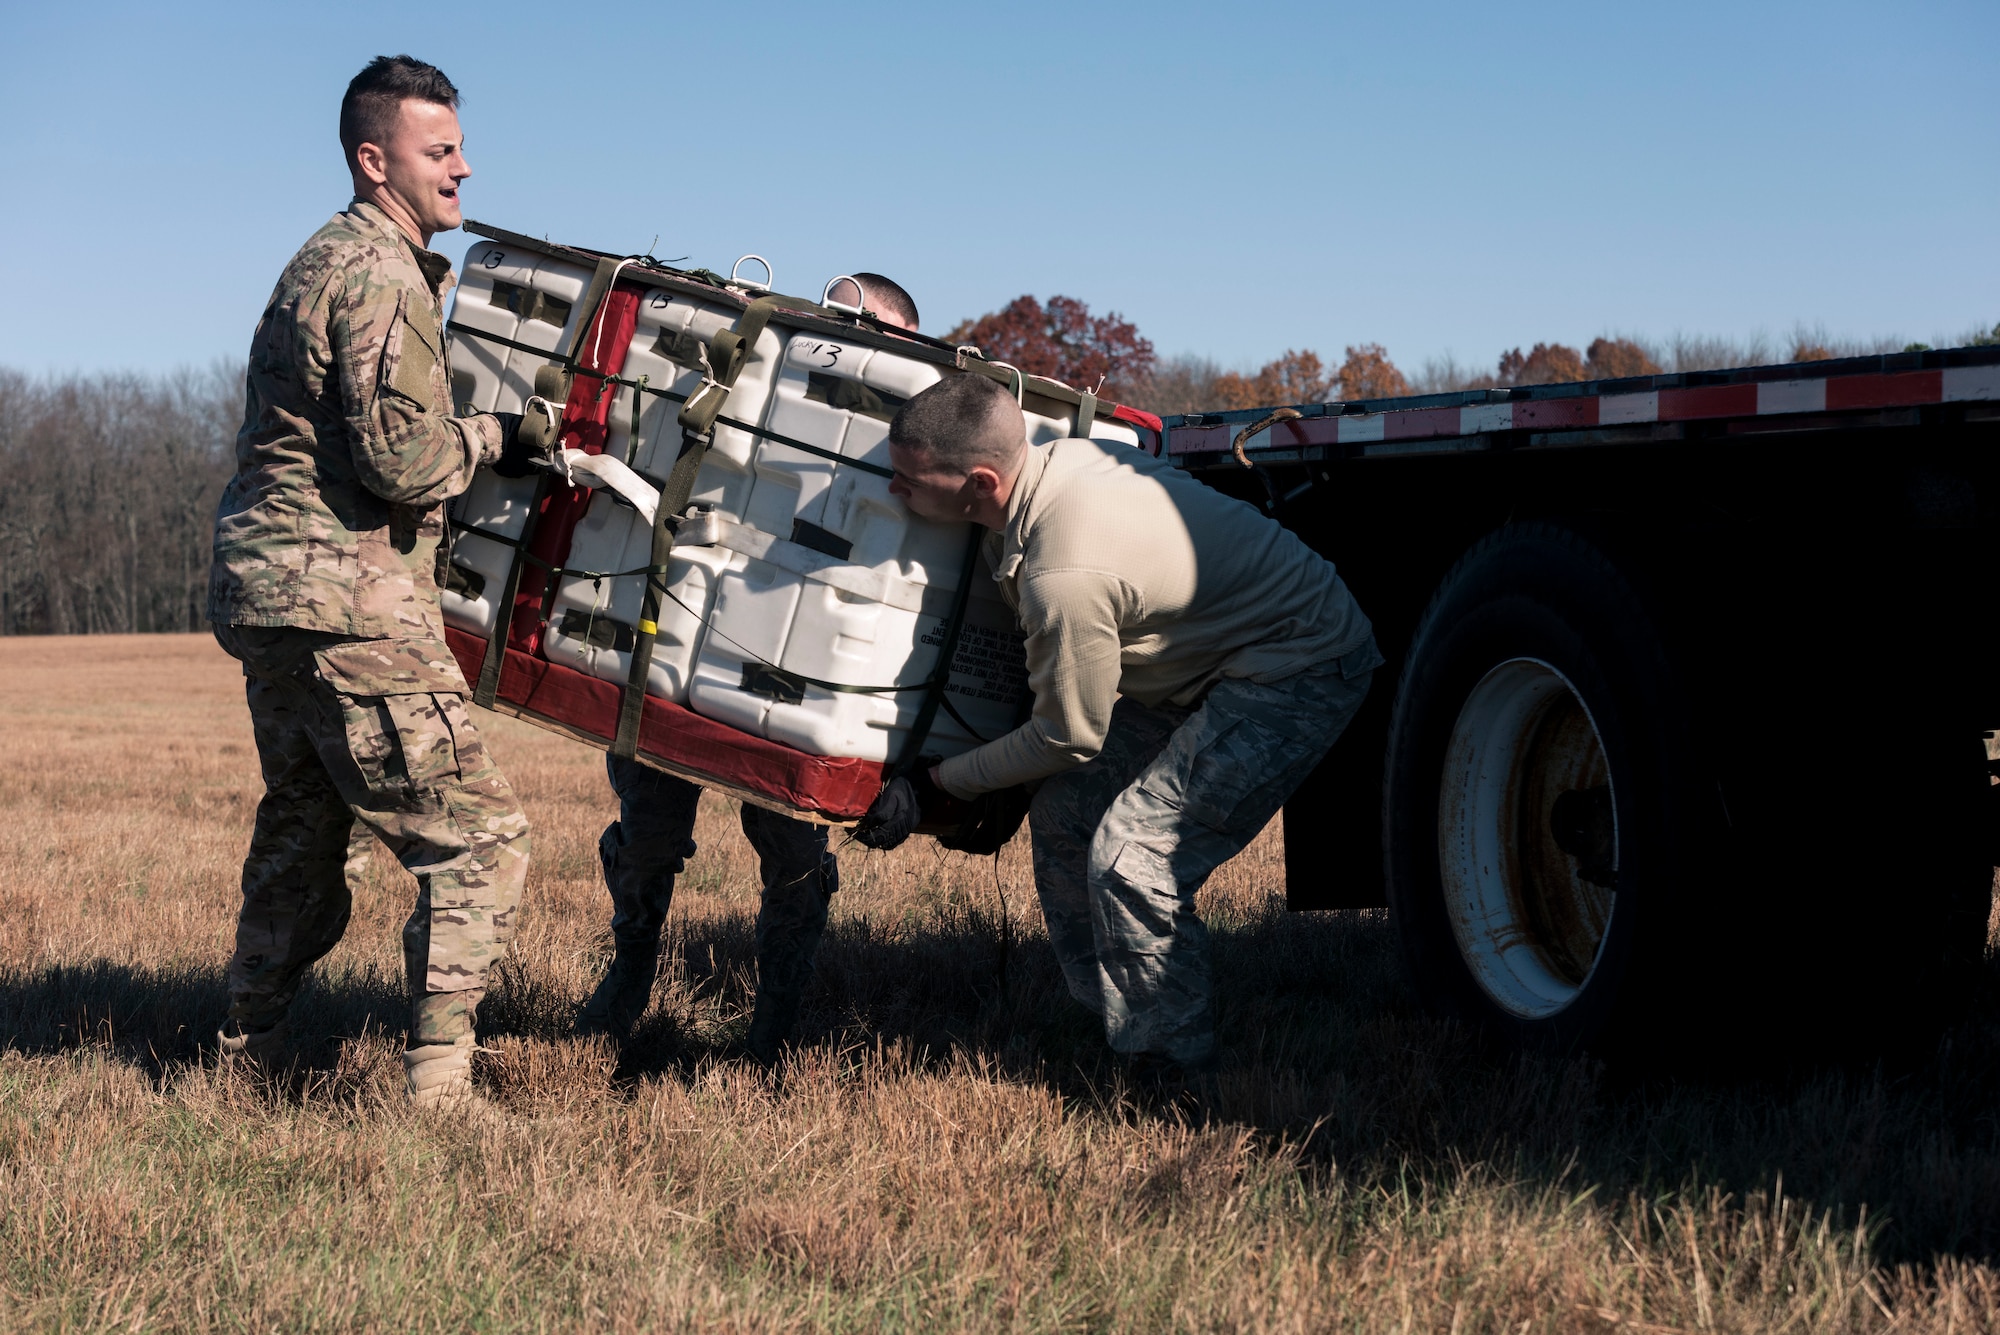 Airmen assigned to the assigned to the 103rd Logistics Readiness Squadron load a recovered cargo pallet onto a flatbed truck at Westover Air Reserve Base, Chicopee, MA. Nov. 2, 2019. Local airdrop missions keep 103rd Operations Group aircrews and 103rd Logistics Readiness Squadron air transportation specialists current on their training requirements. (U.S. Air National Guard photo by Airman 1st Class Chanhda Ly)